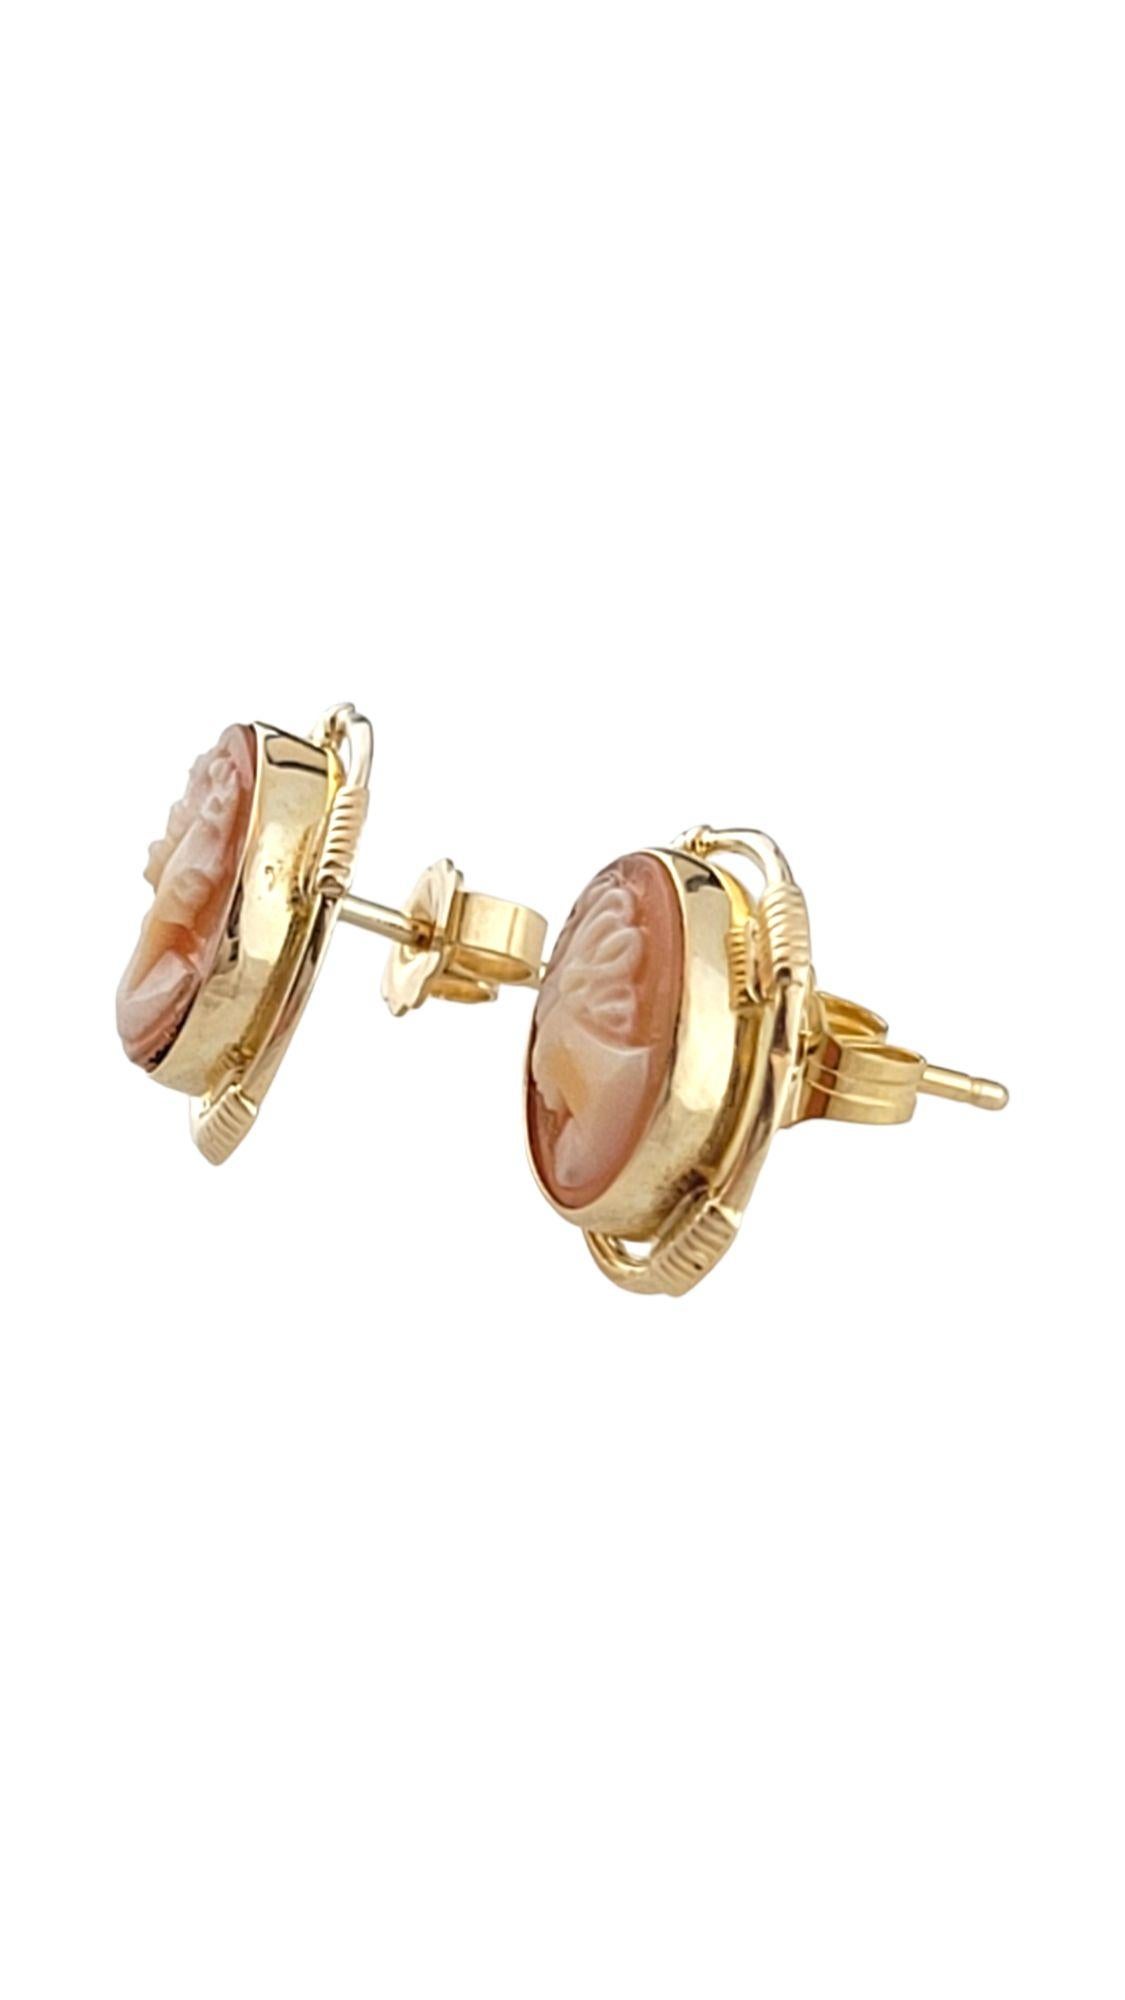 Gorgeous set of cameo stud earrings set in 14K yellow gold!

Size: 14mm X 11.7mm X 4mm

Weight: 2.10 g/ 1.3 dwt

Hallmark: 14K zz

Very good condition, professionally polished.

Will come packaged in a gift box or pouch (when possible) and will be